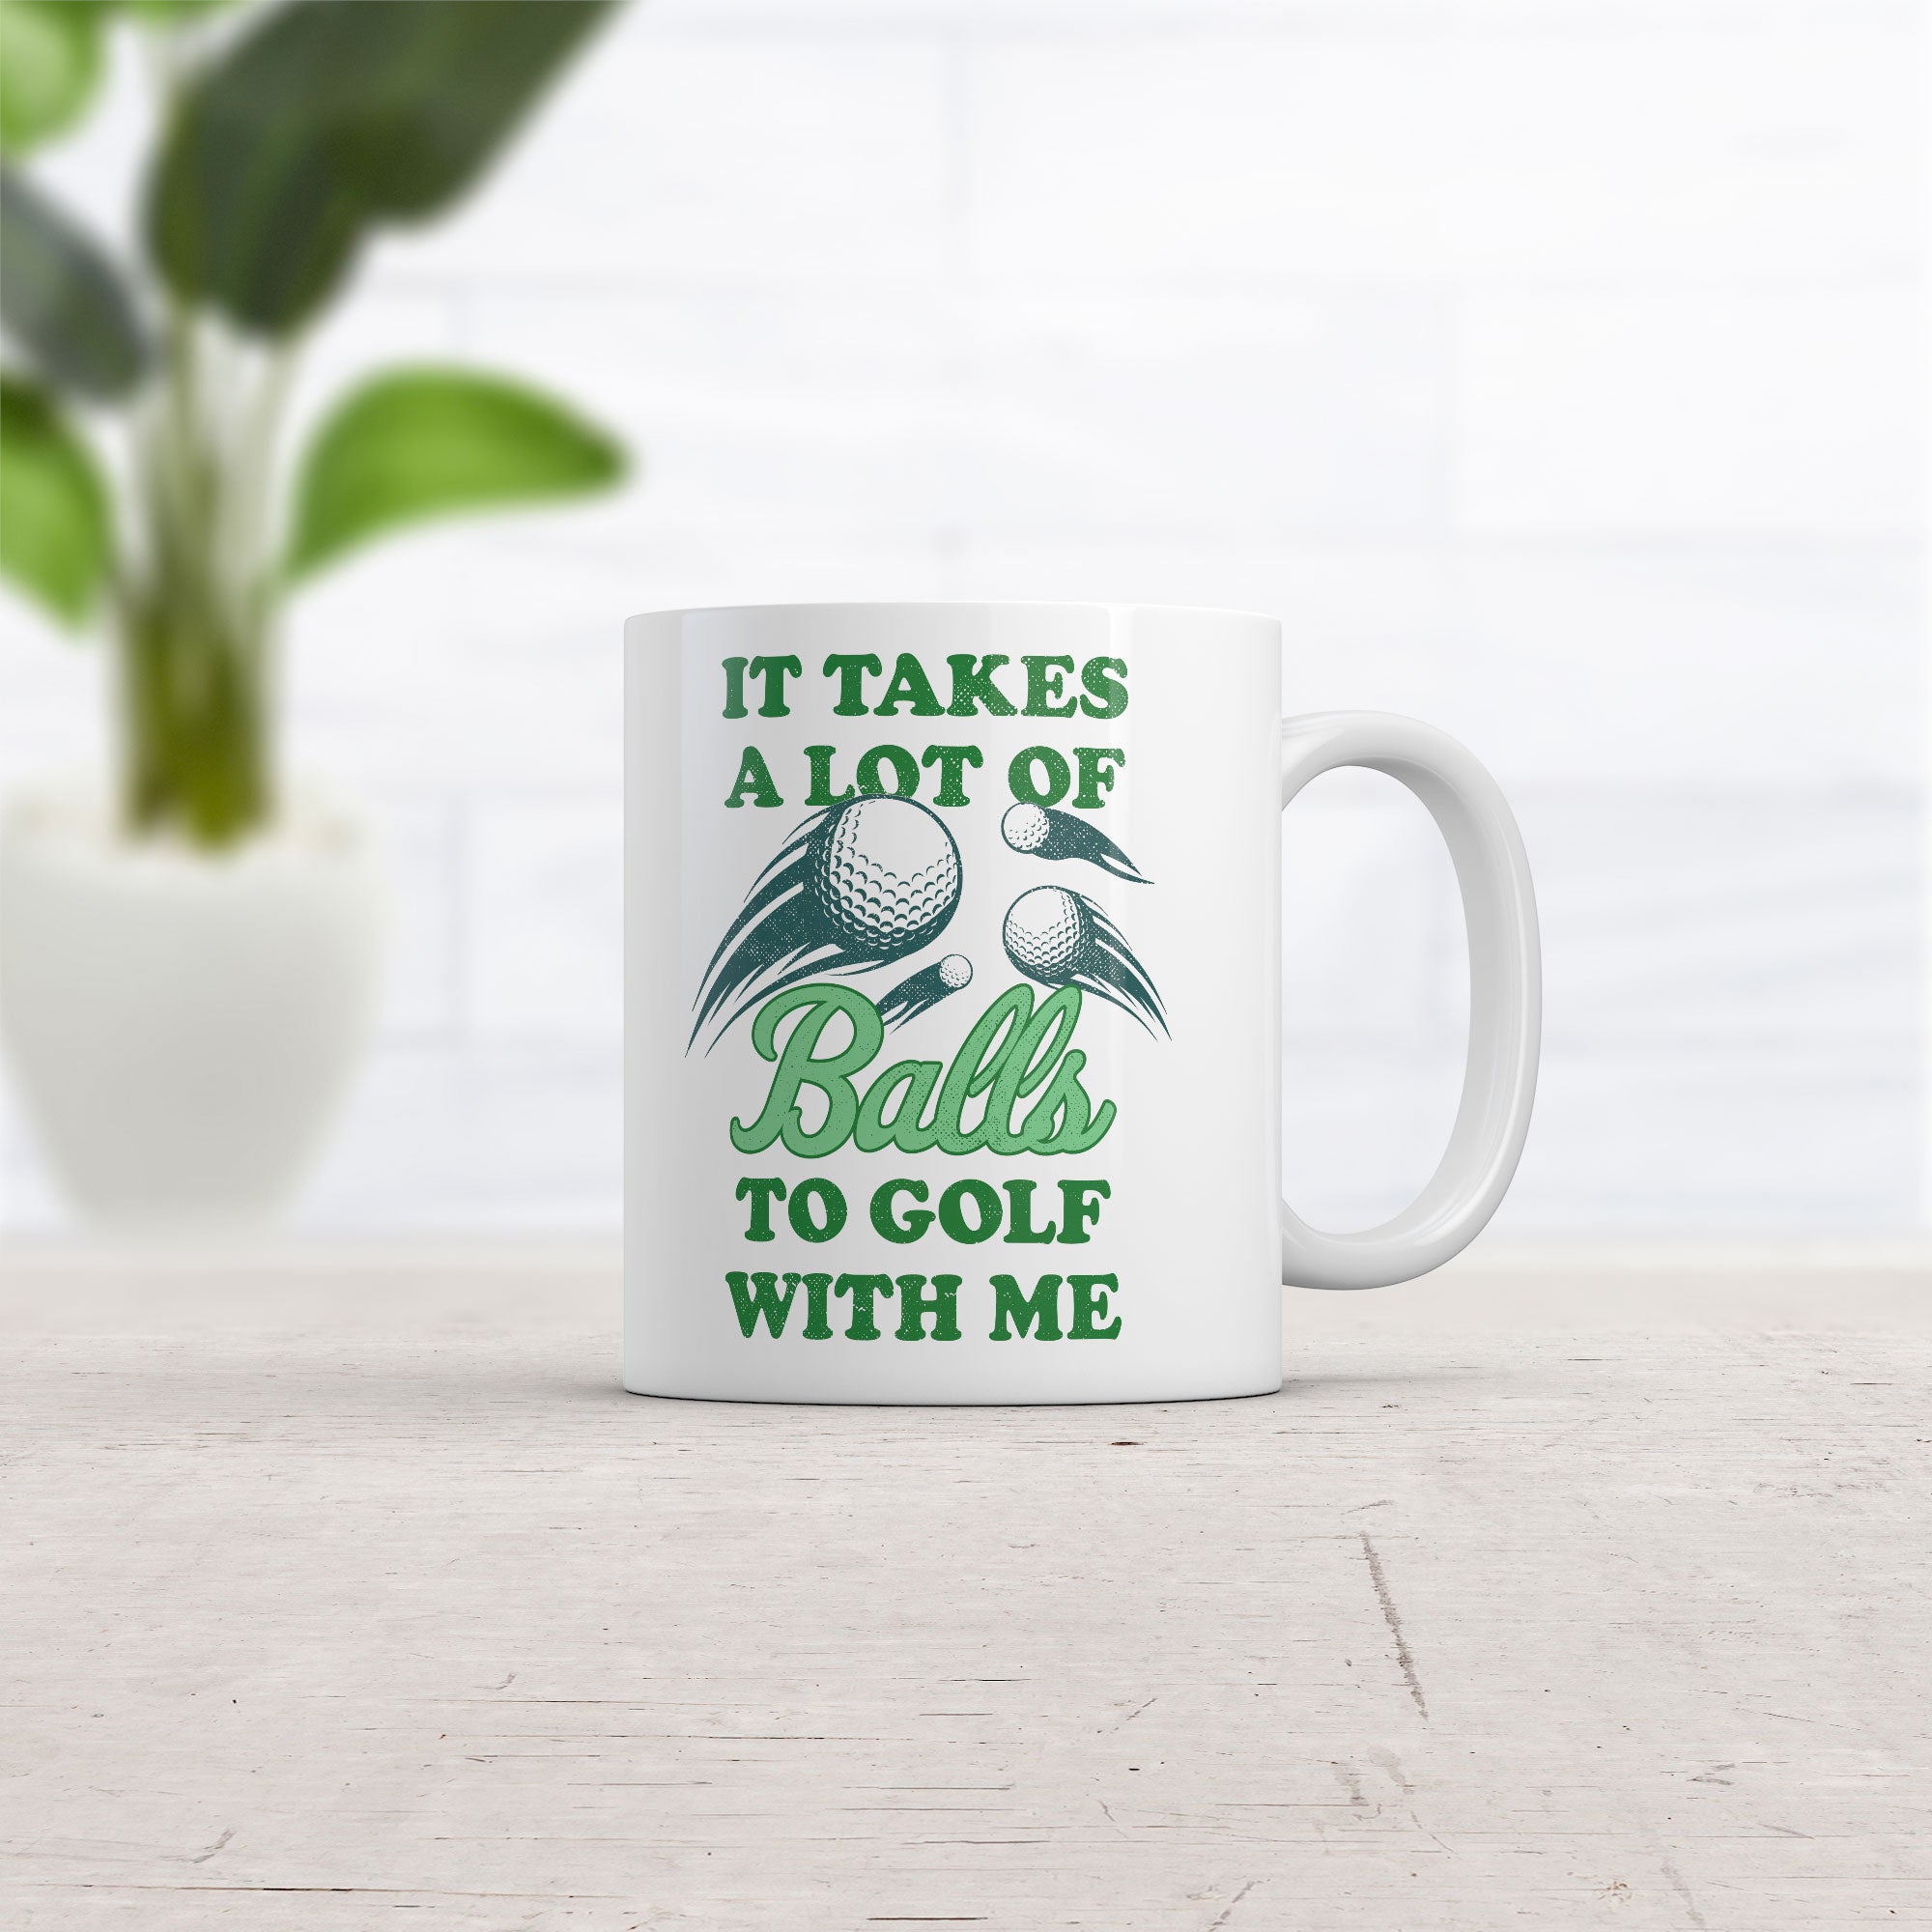 Funny White It Takes A Lot Of Balls To Golf With Me Coffee Mug Nerdy Golf sarcastic Tee